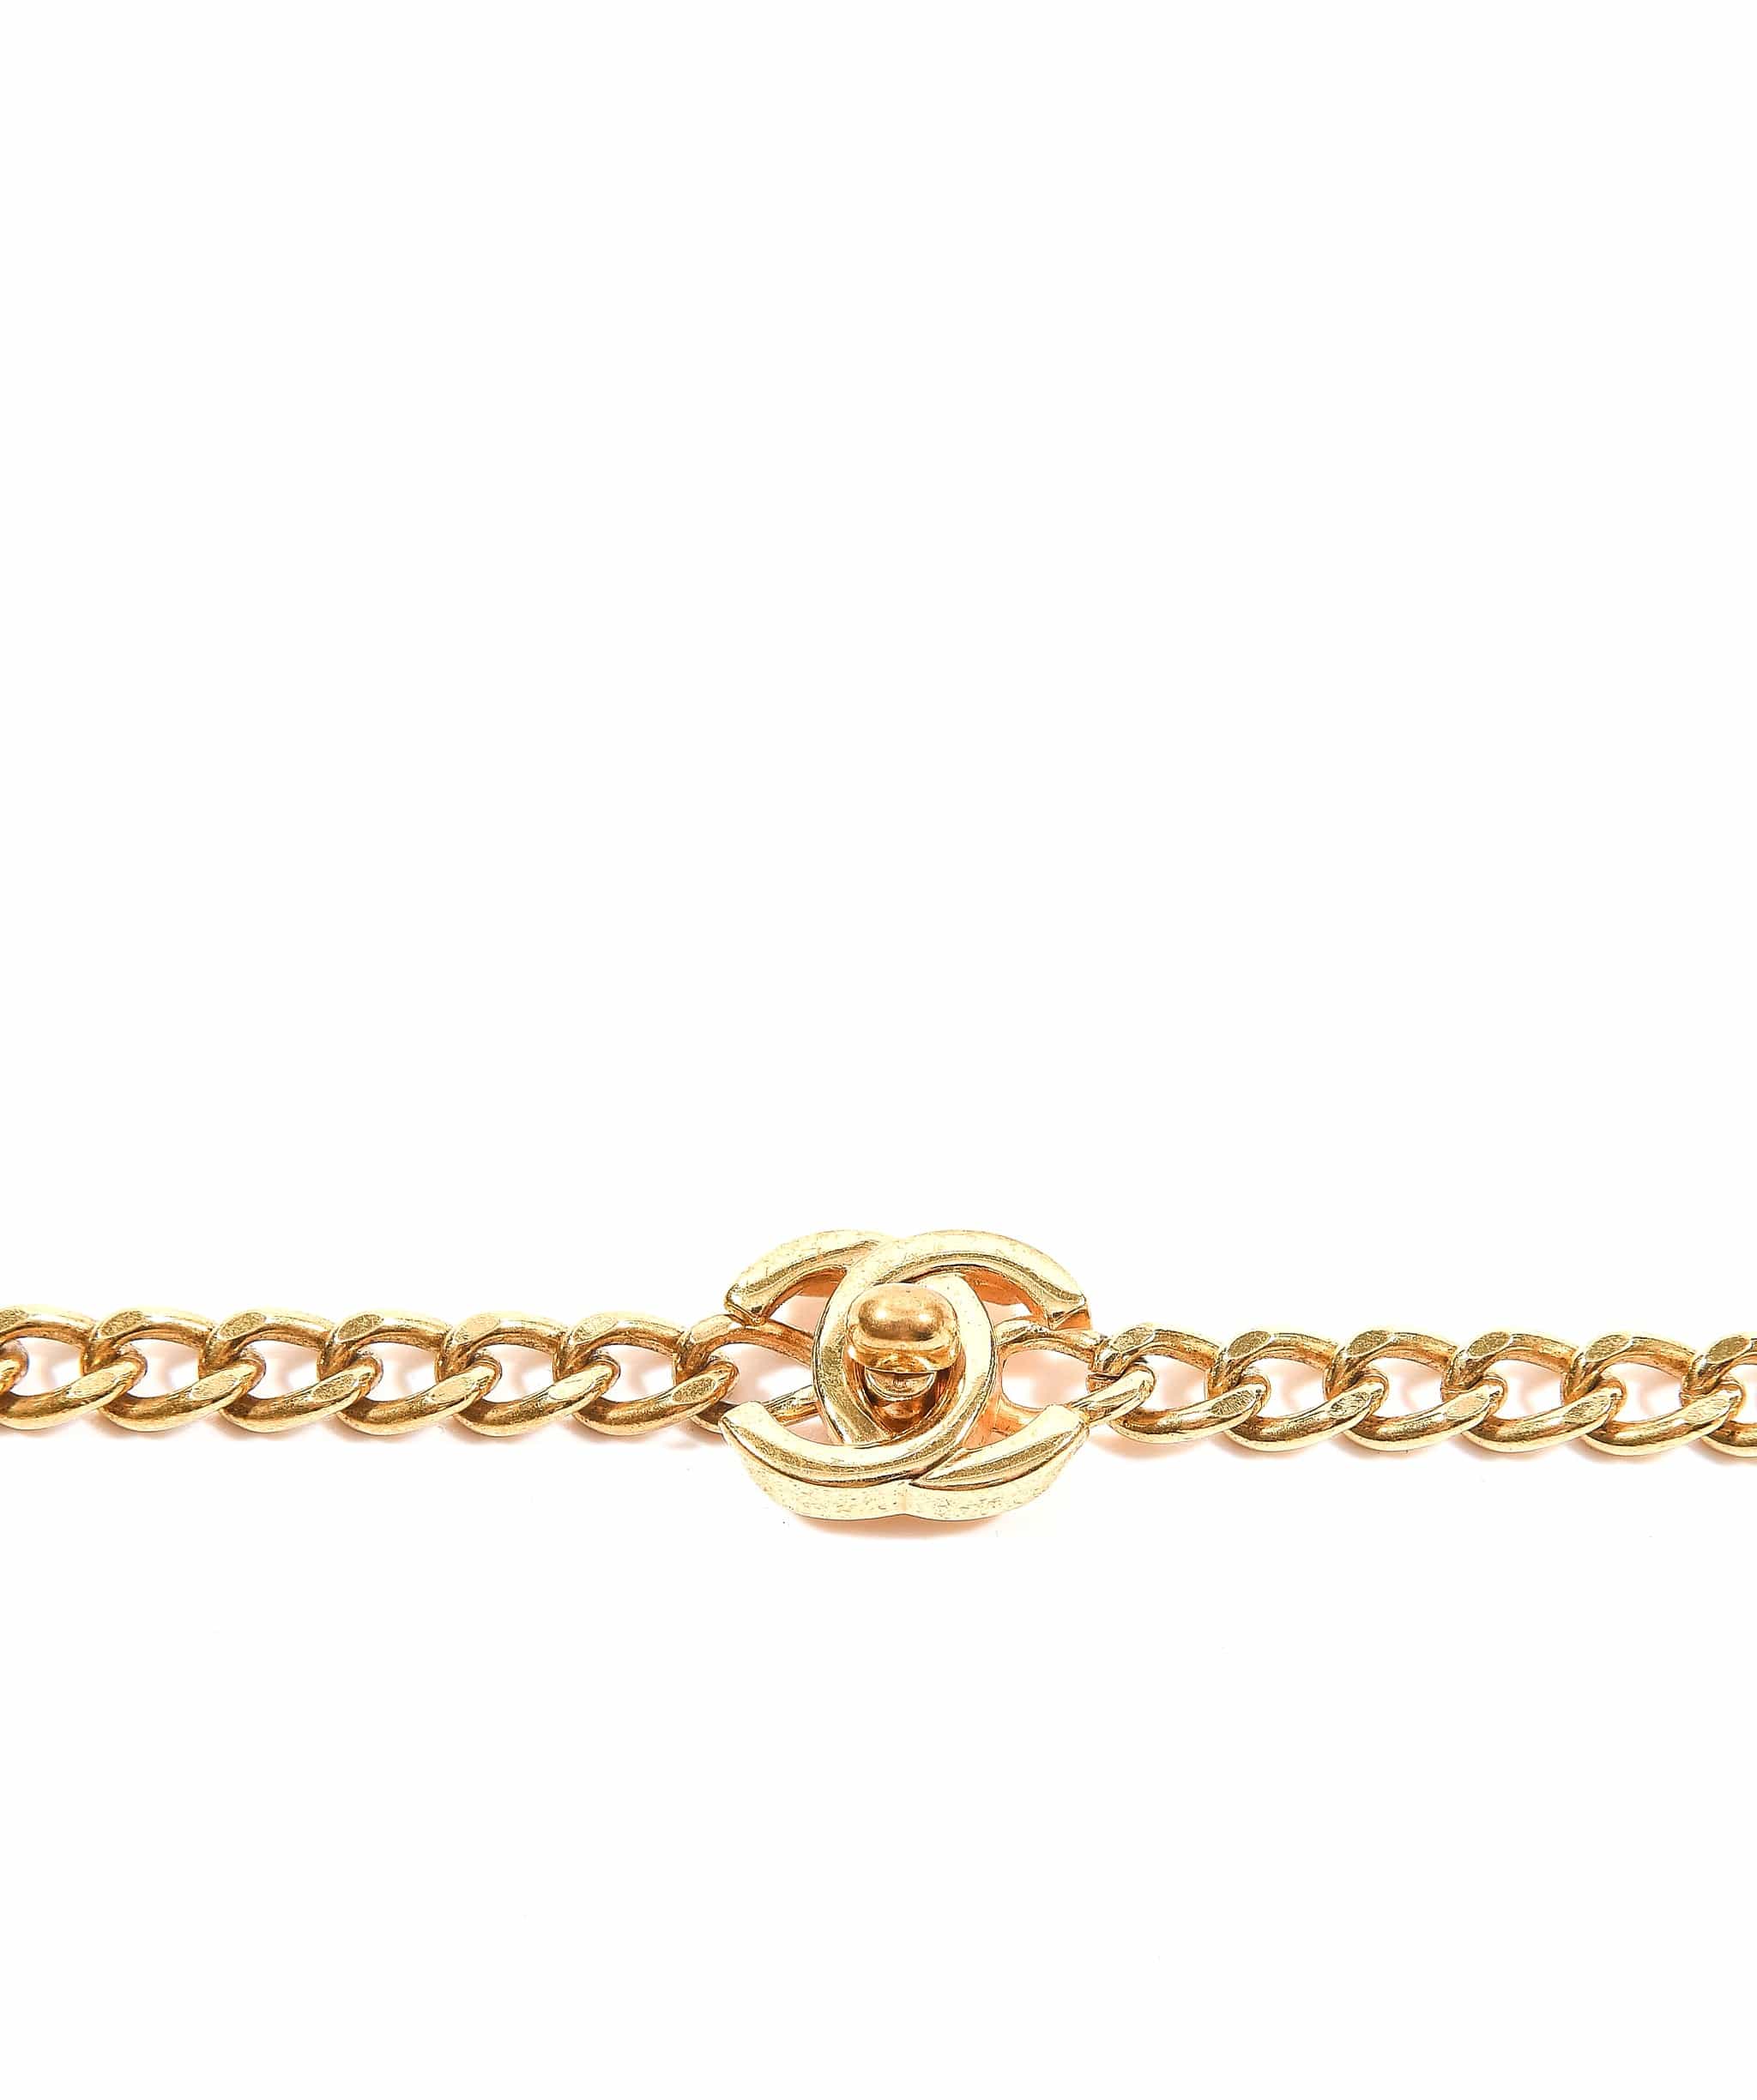 Chanel Chanel turnlock CC long necklace - AWL3333